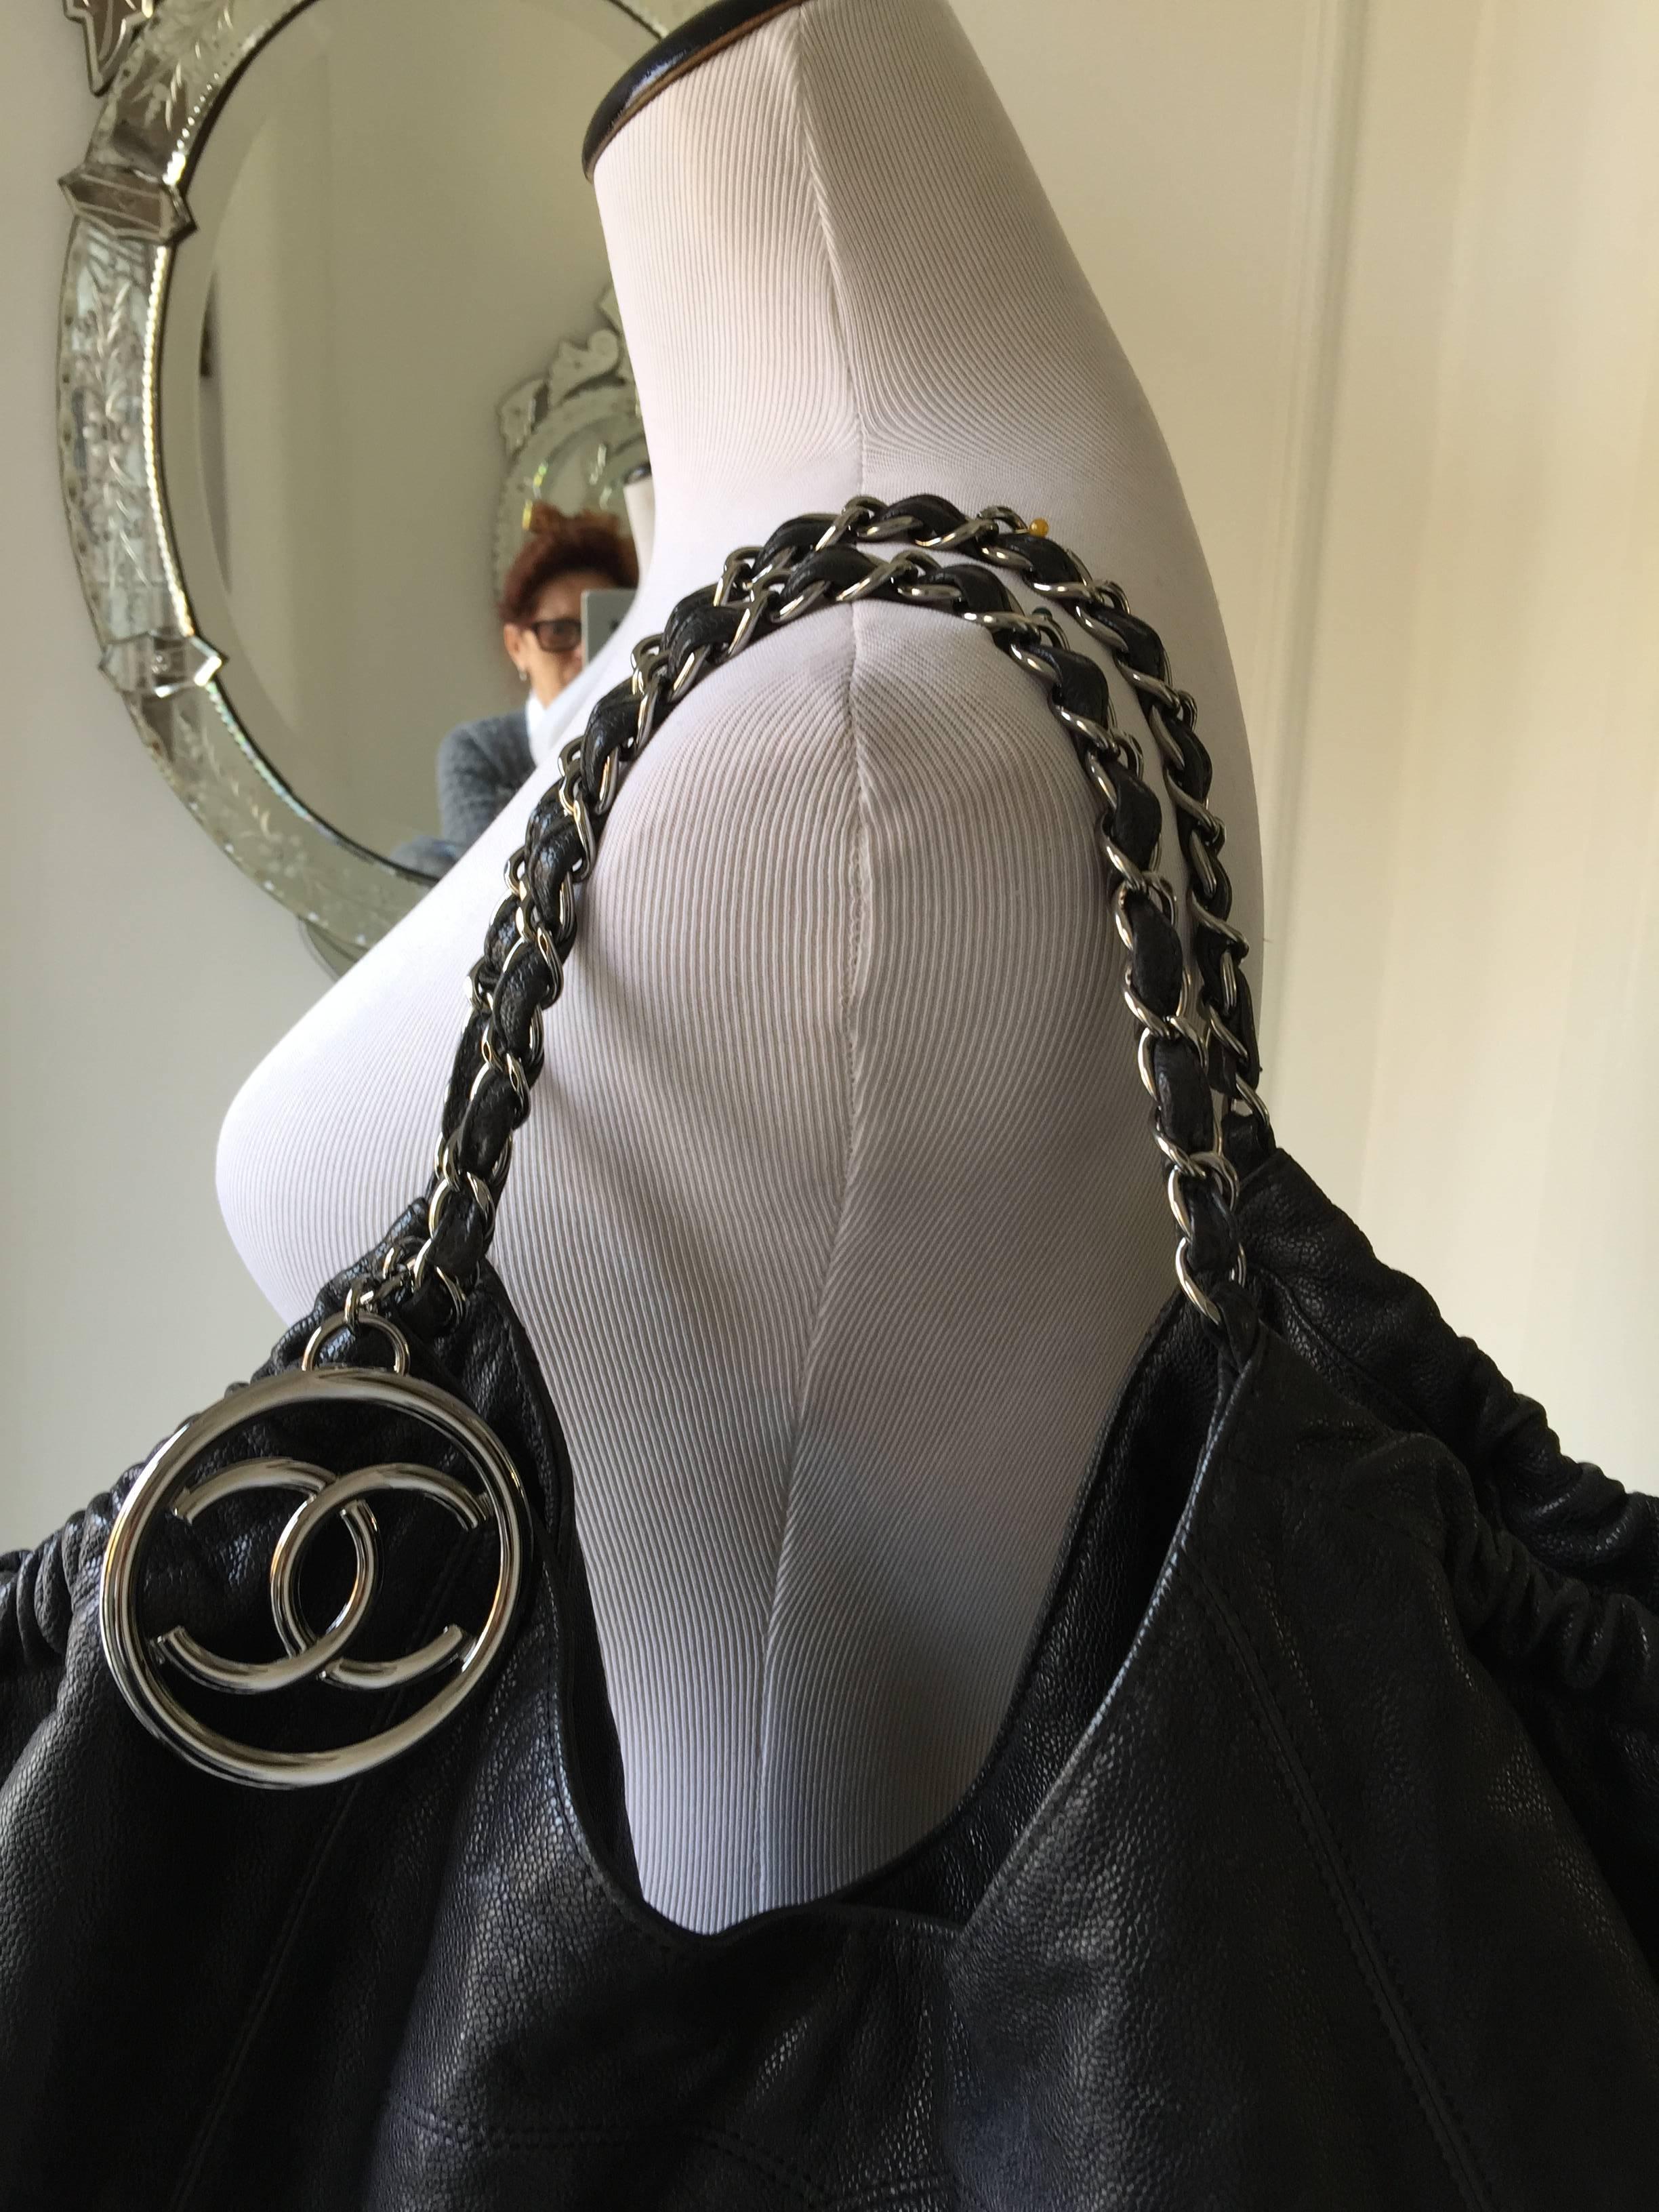 This much coveted Chanel caviar leather Coco cabas tote is no longer in production.
The lining is in black Chanel monogram fabric in excellent condition.
Included is the coordinating Chanel monogramed black cosmetic case.
Large interlocking CC